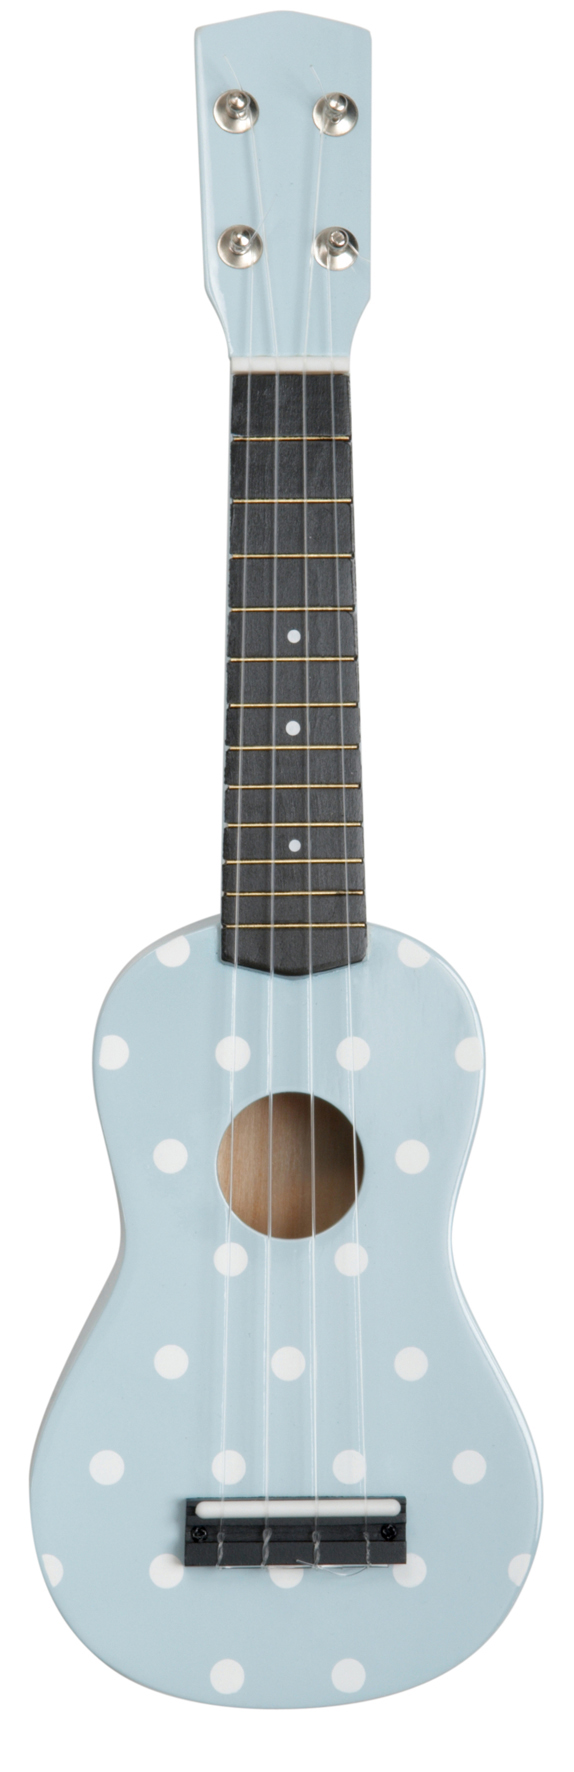 Inspire a budding rock star with this fabulous acoustic guitar. Perfectly sized to fit little ones a